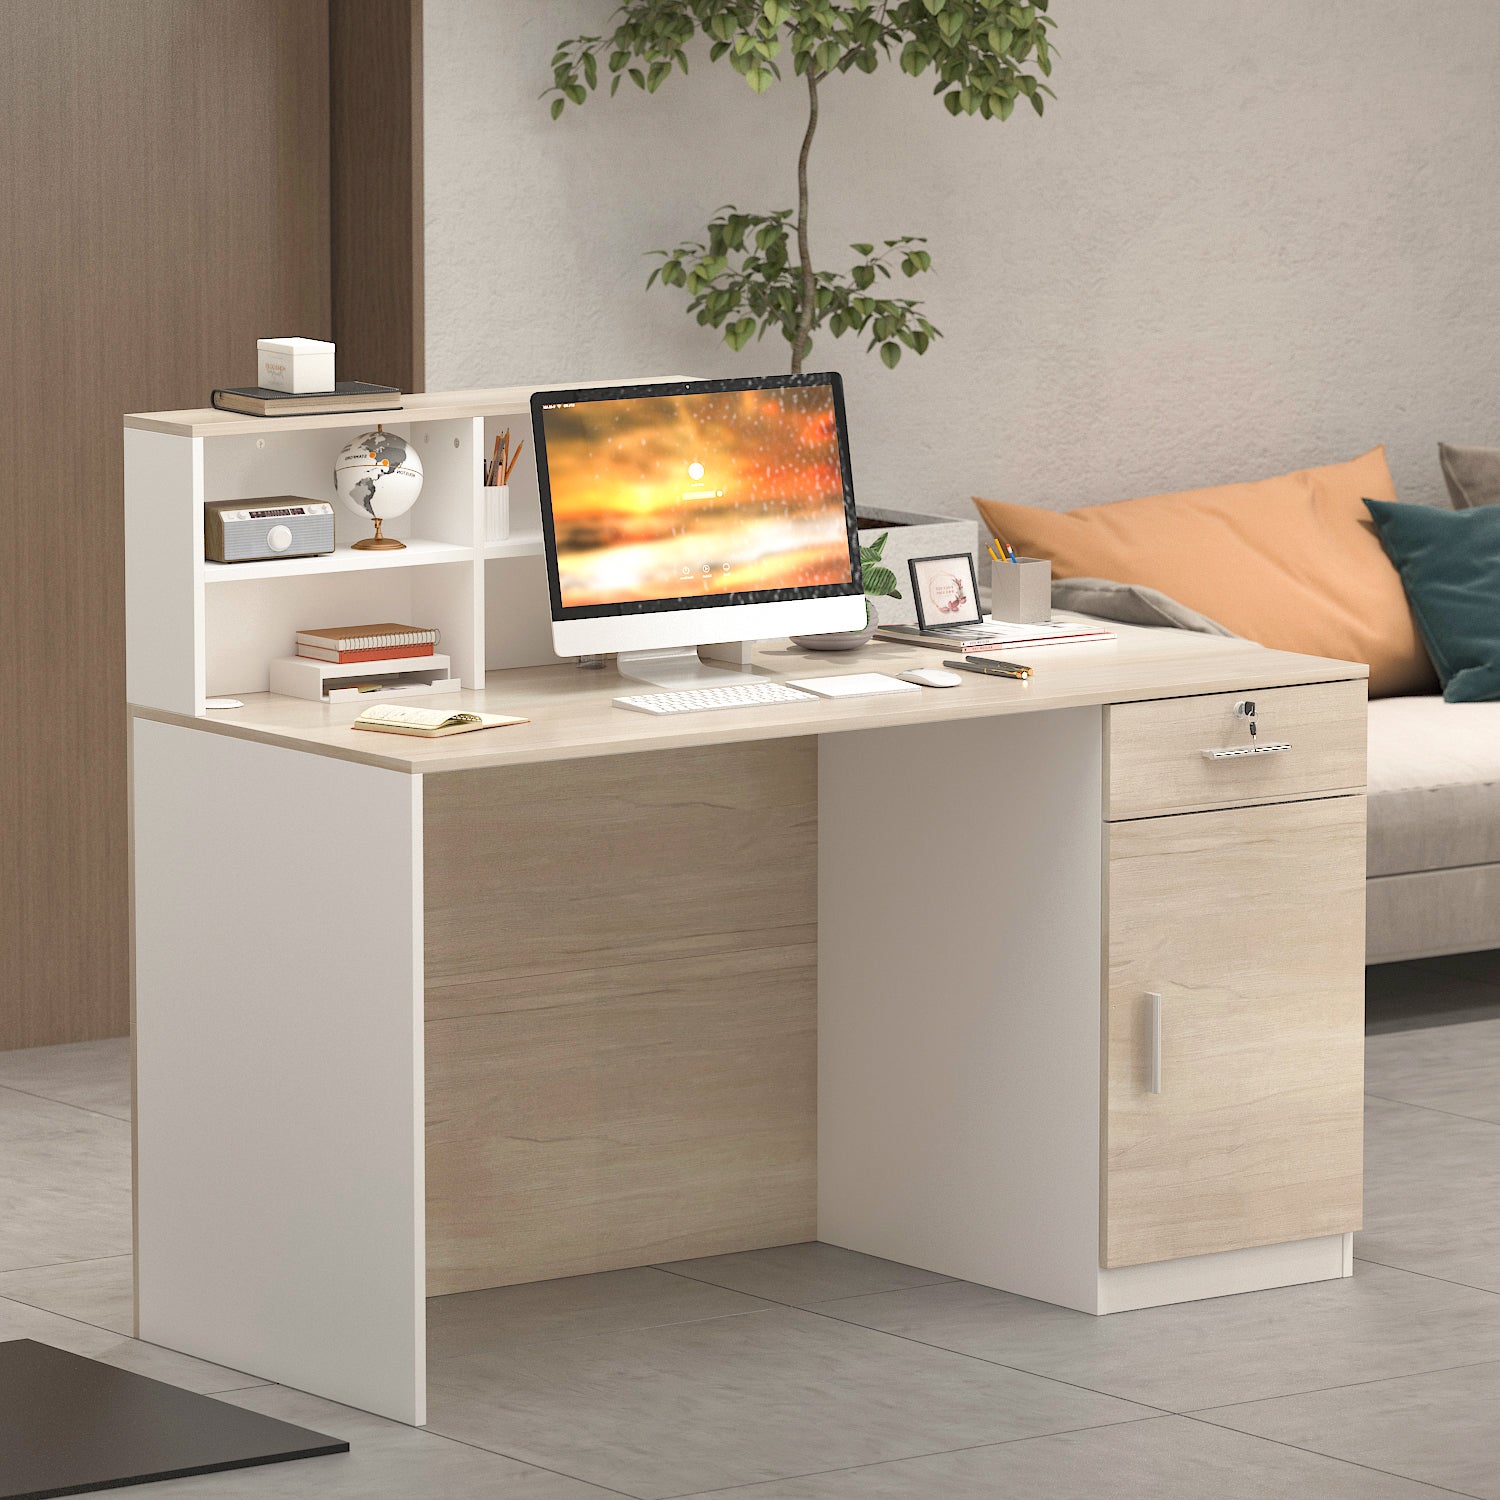 Reception Desk with Counter & Filing Cabinets for Checkout & Retail